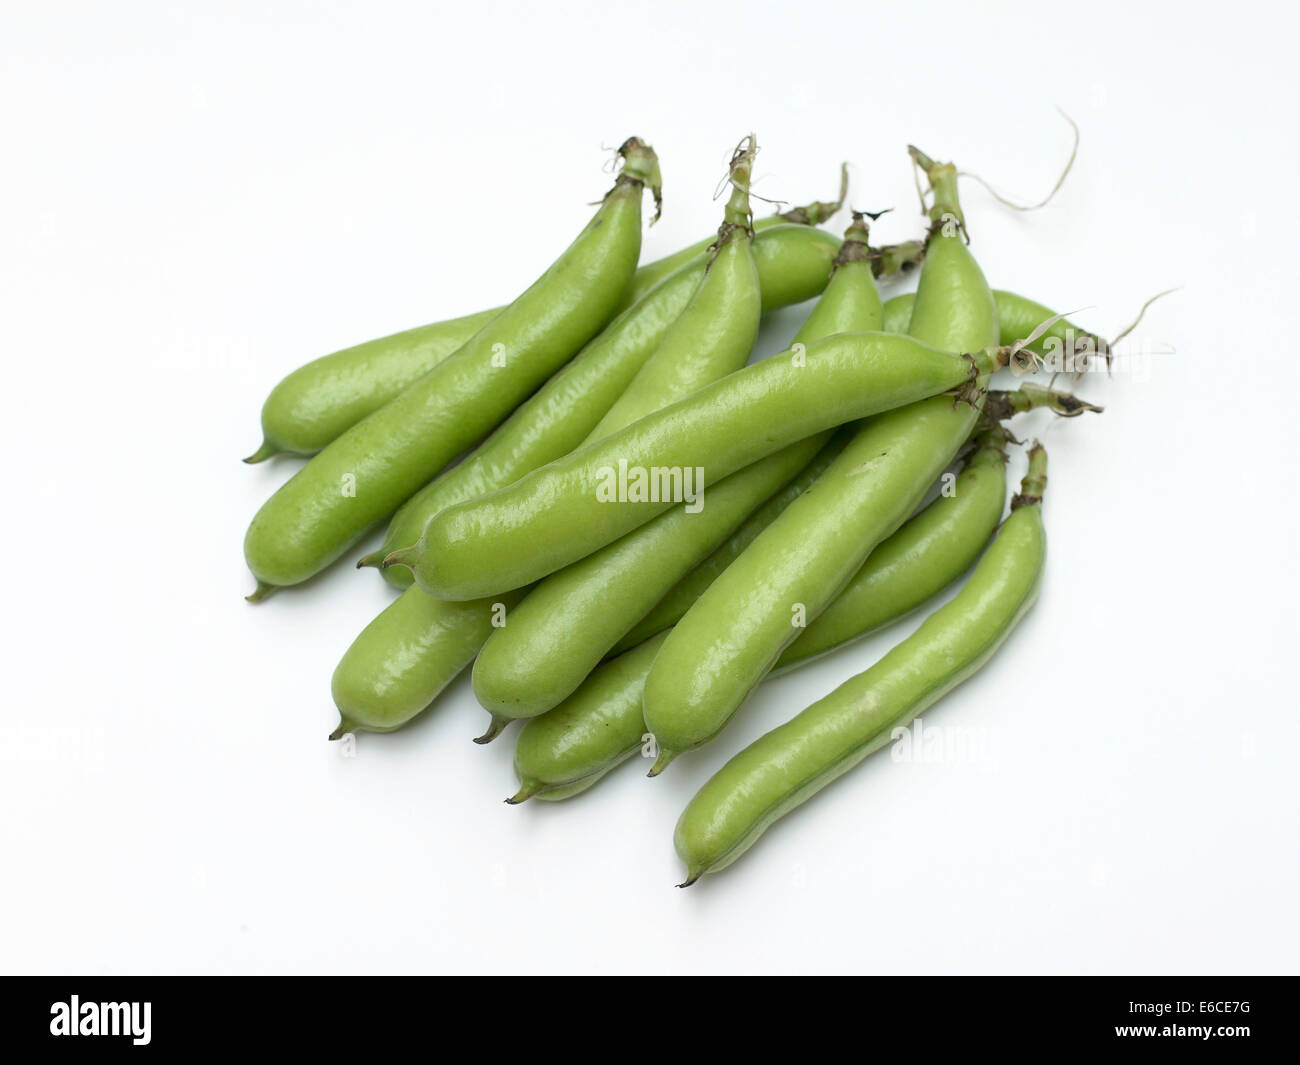 Broad Beans on White background Stock Photo